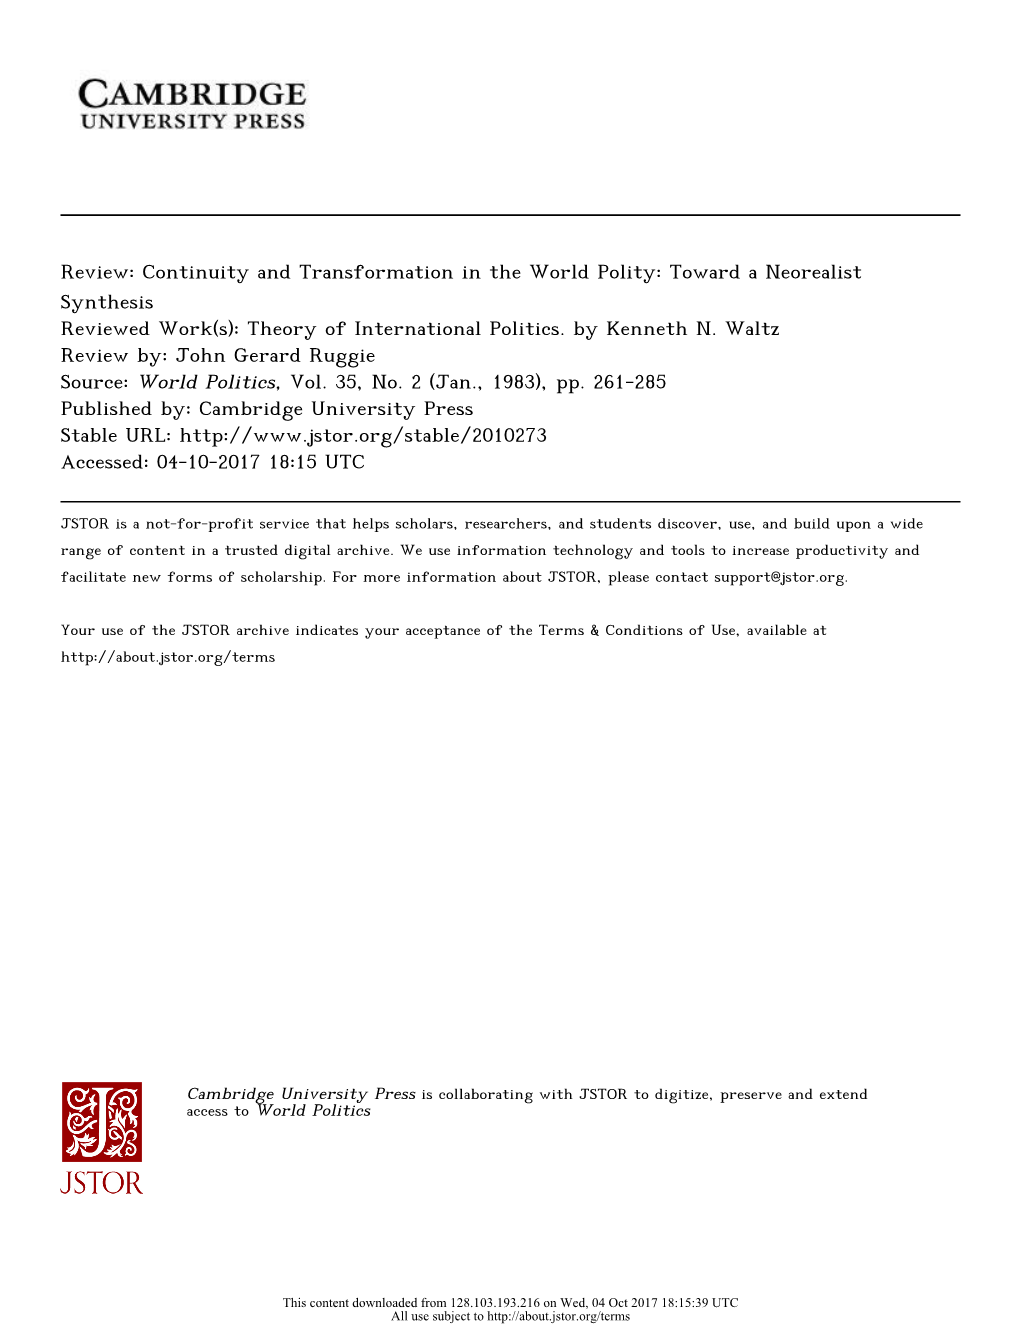 Continuity and Transformation in the World Polity: Toward a Neorealist Synthesis Reviewed Work(S): Theory of International Politics